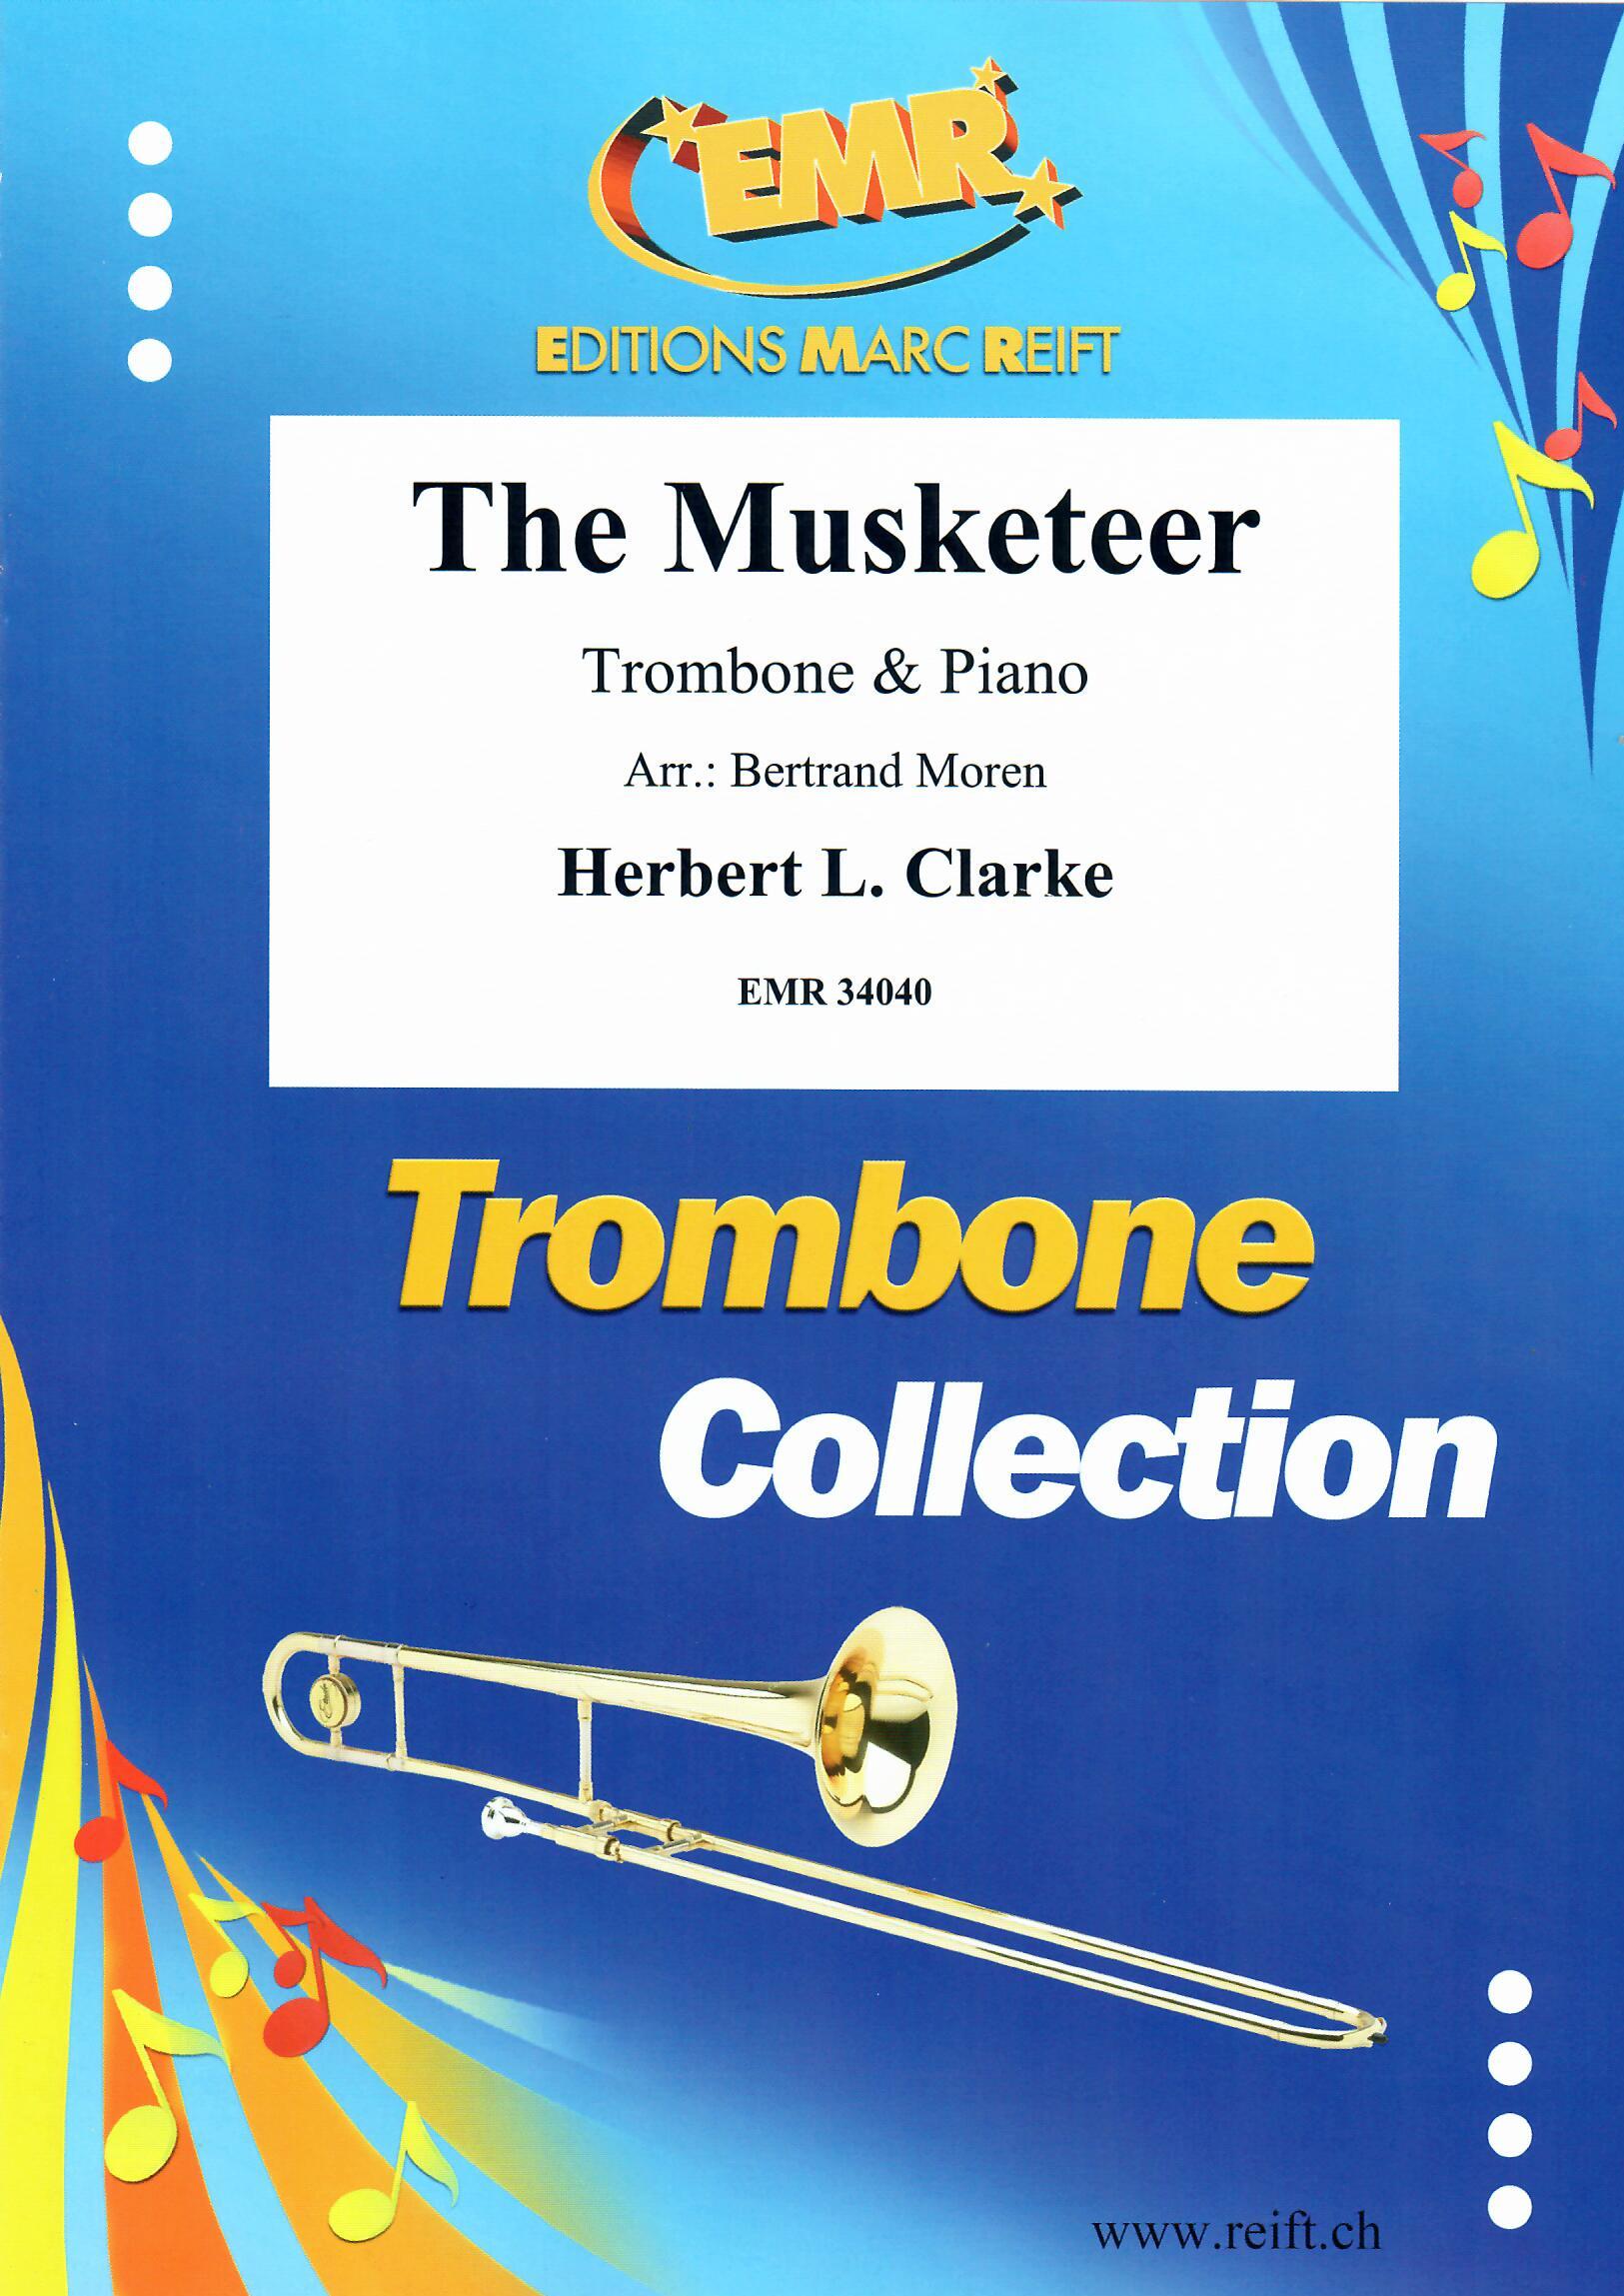 THE MUSKETEER, SOLOS - Trombone